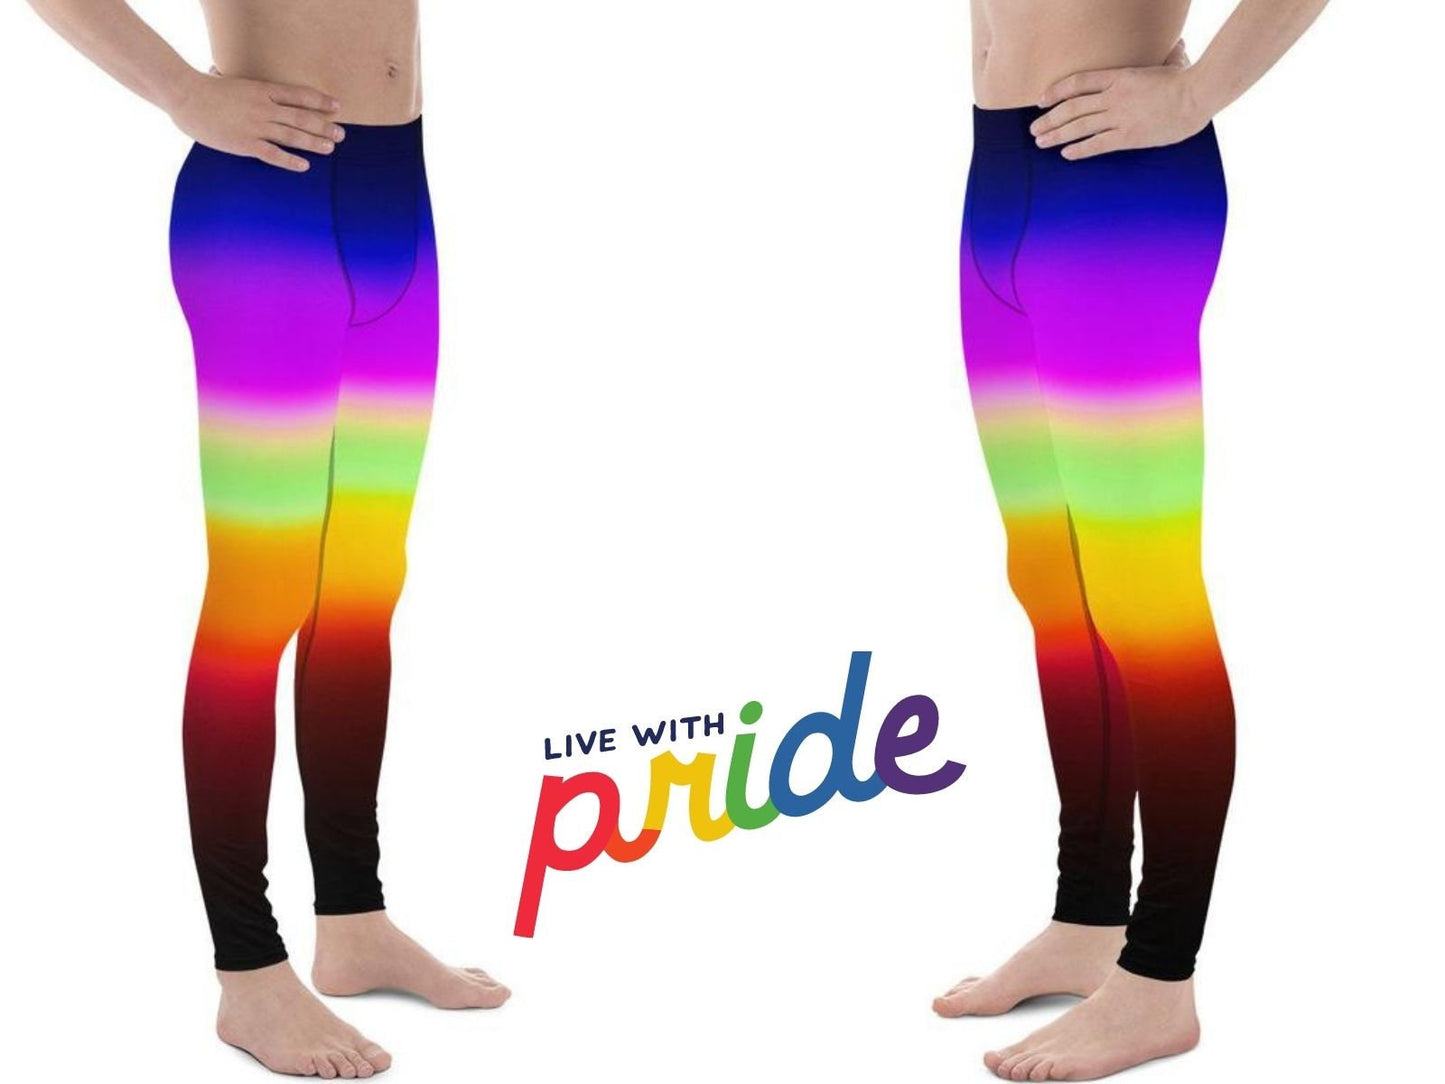 Rainbow Pride Striped Meggings for Men Activewear Leggings LGBT Gay Pride Parade Sports Workout Outfit Colorful Fun Spandex Pants